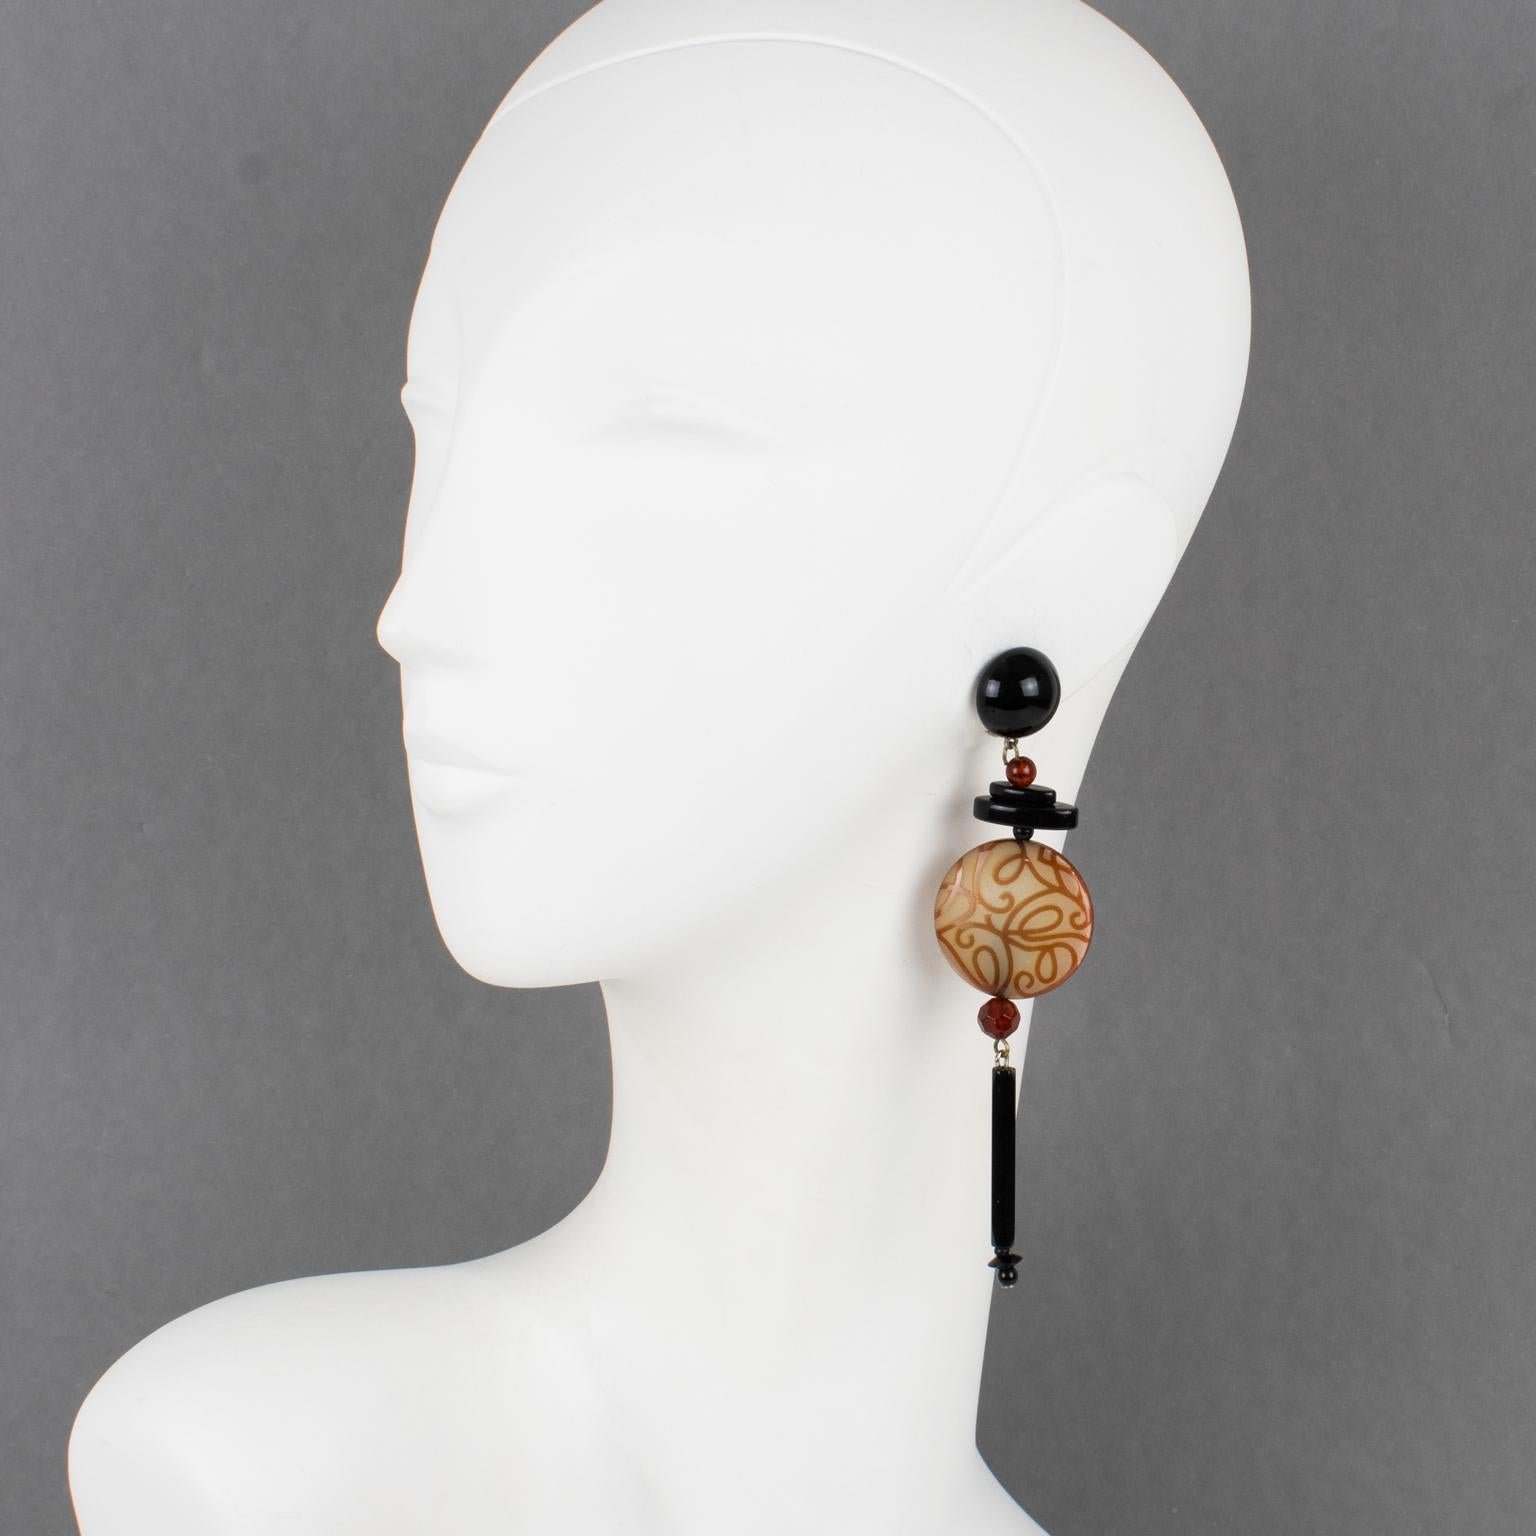 Elegant Angela Caputi, made in Italy resin clip-on earrings. An extra-long dangling shape in black color contrasted with a large milky honey flat disk ornate with an arabesque carved design. Her matching of colors is always extremely classy, perfect